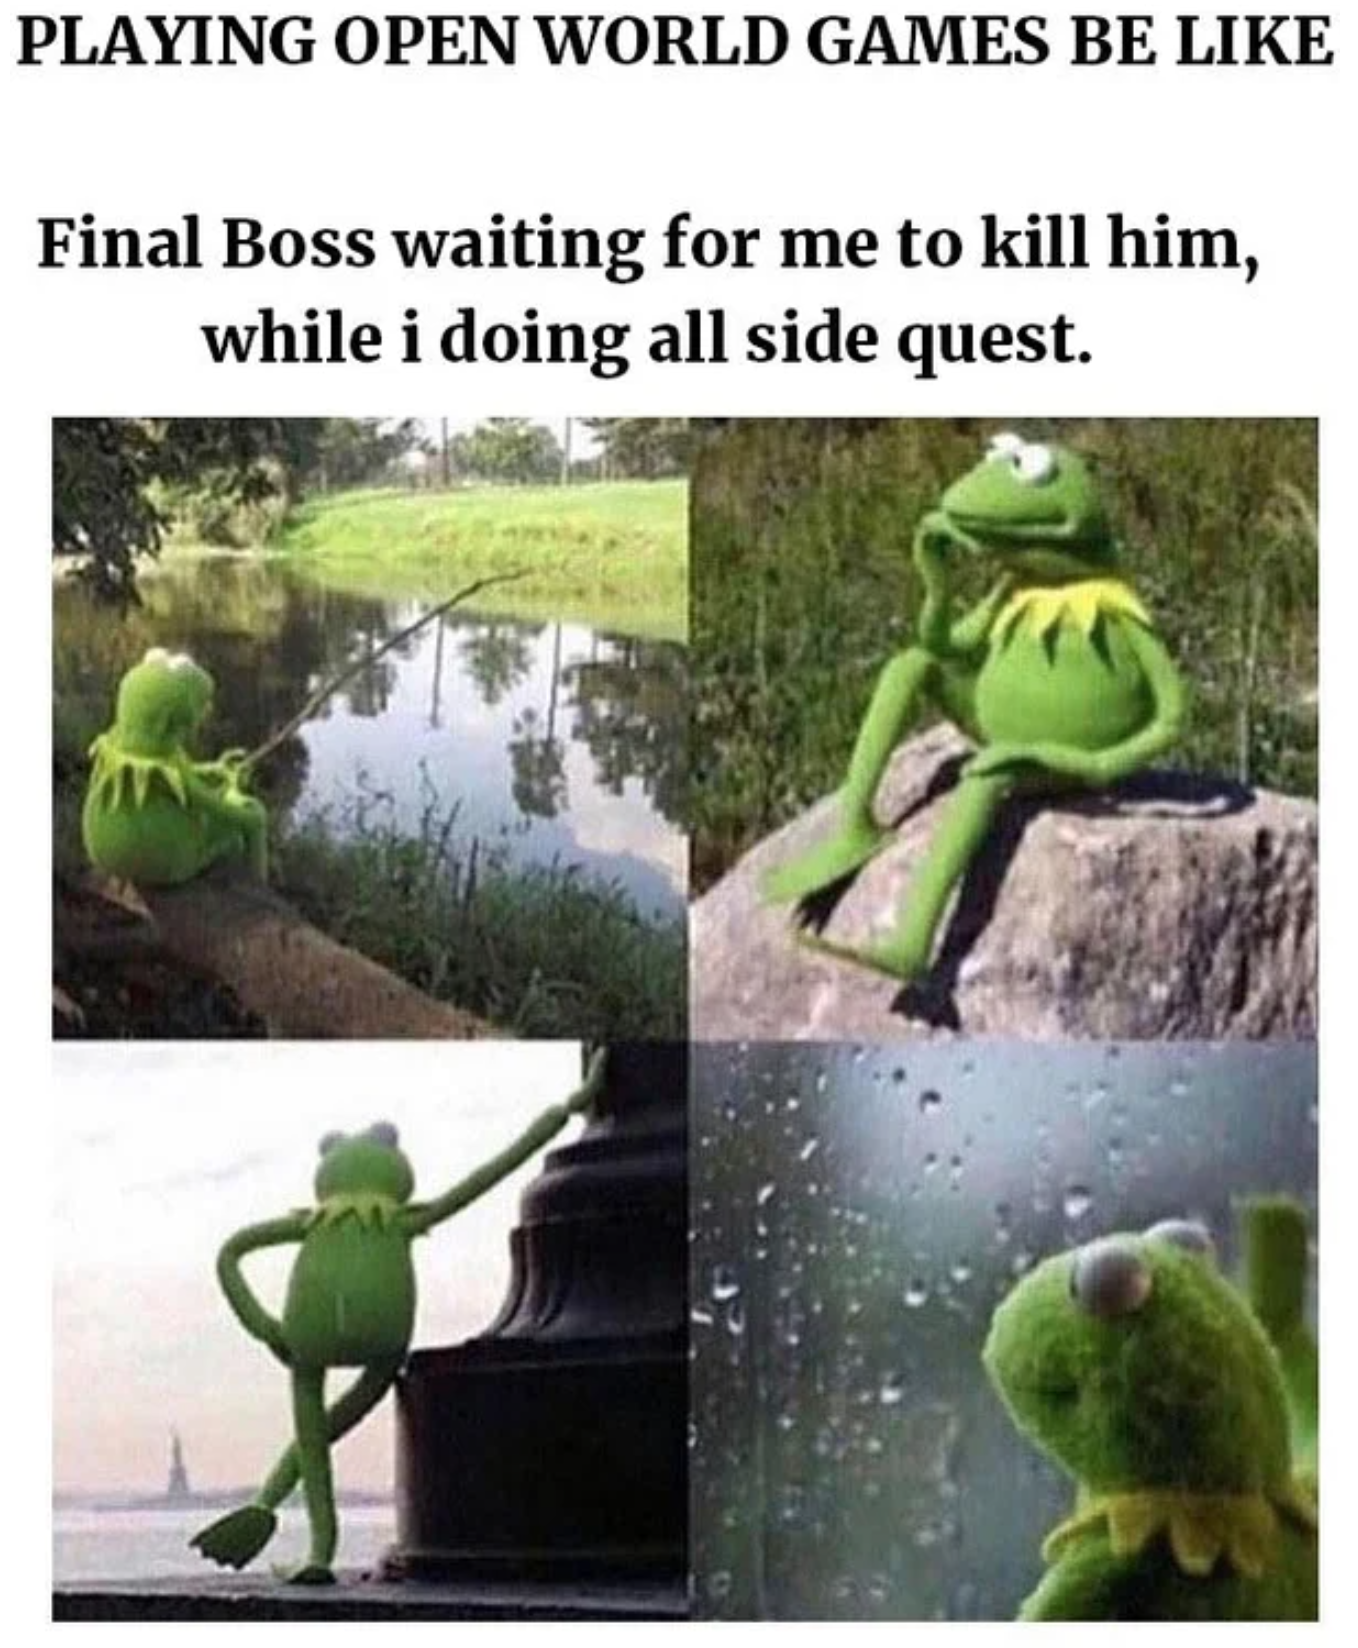 funny gaming memes - kermit meme sad - Playing Open World Games Be Final Boss waiting for me to kill him, while i doing all side quest.